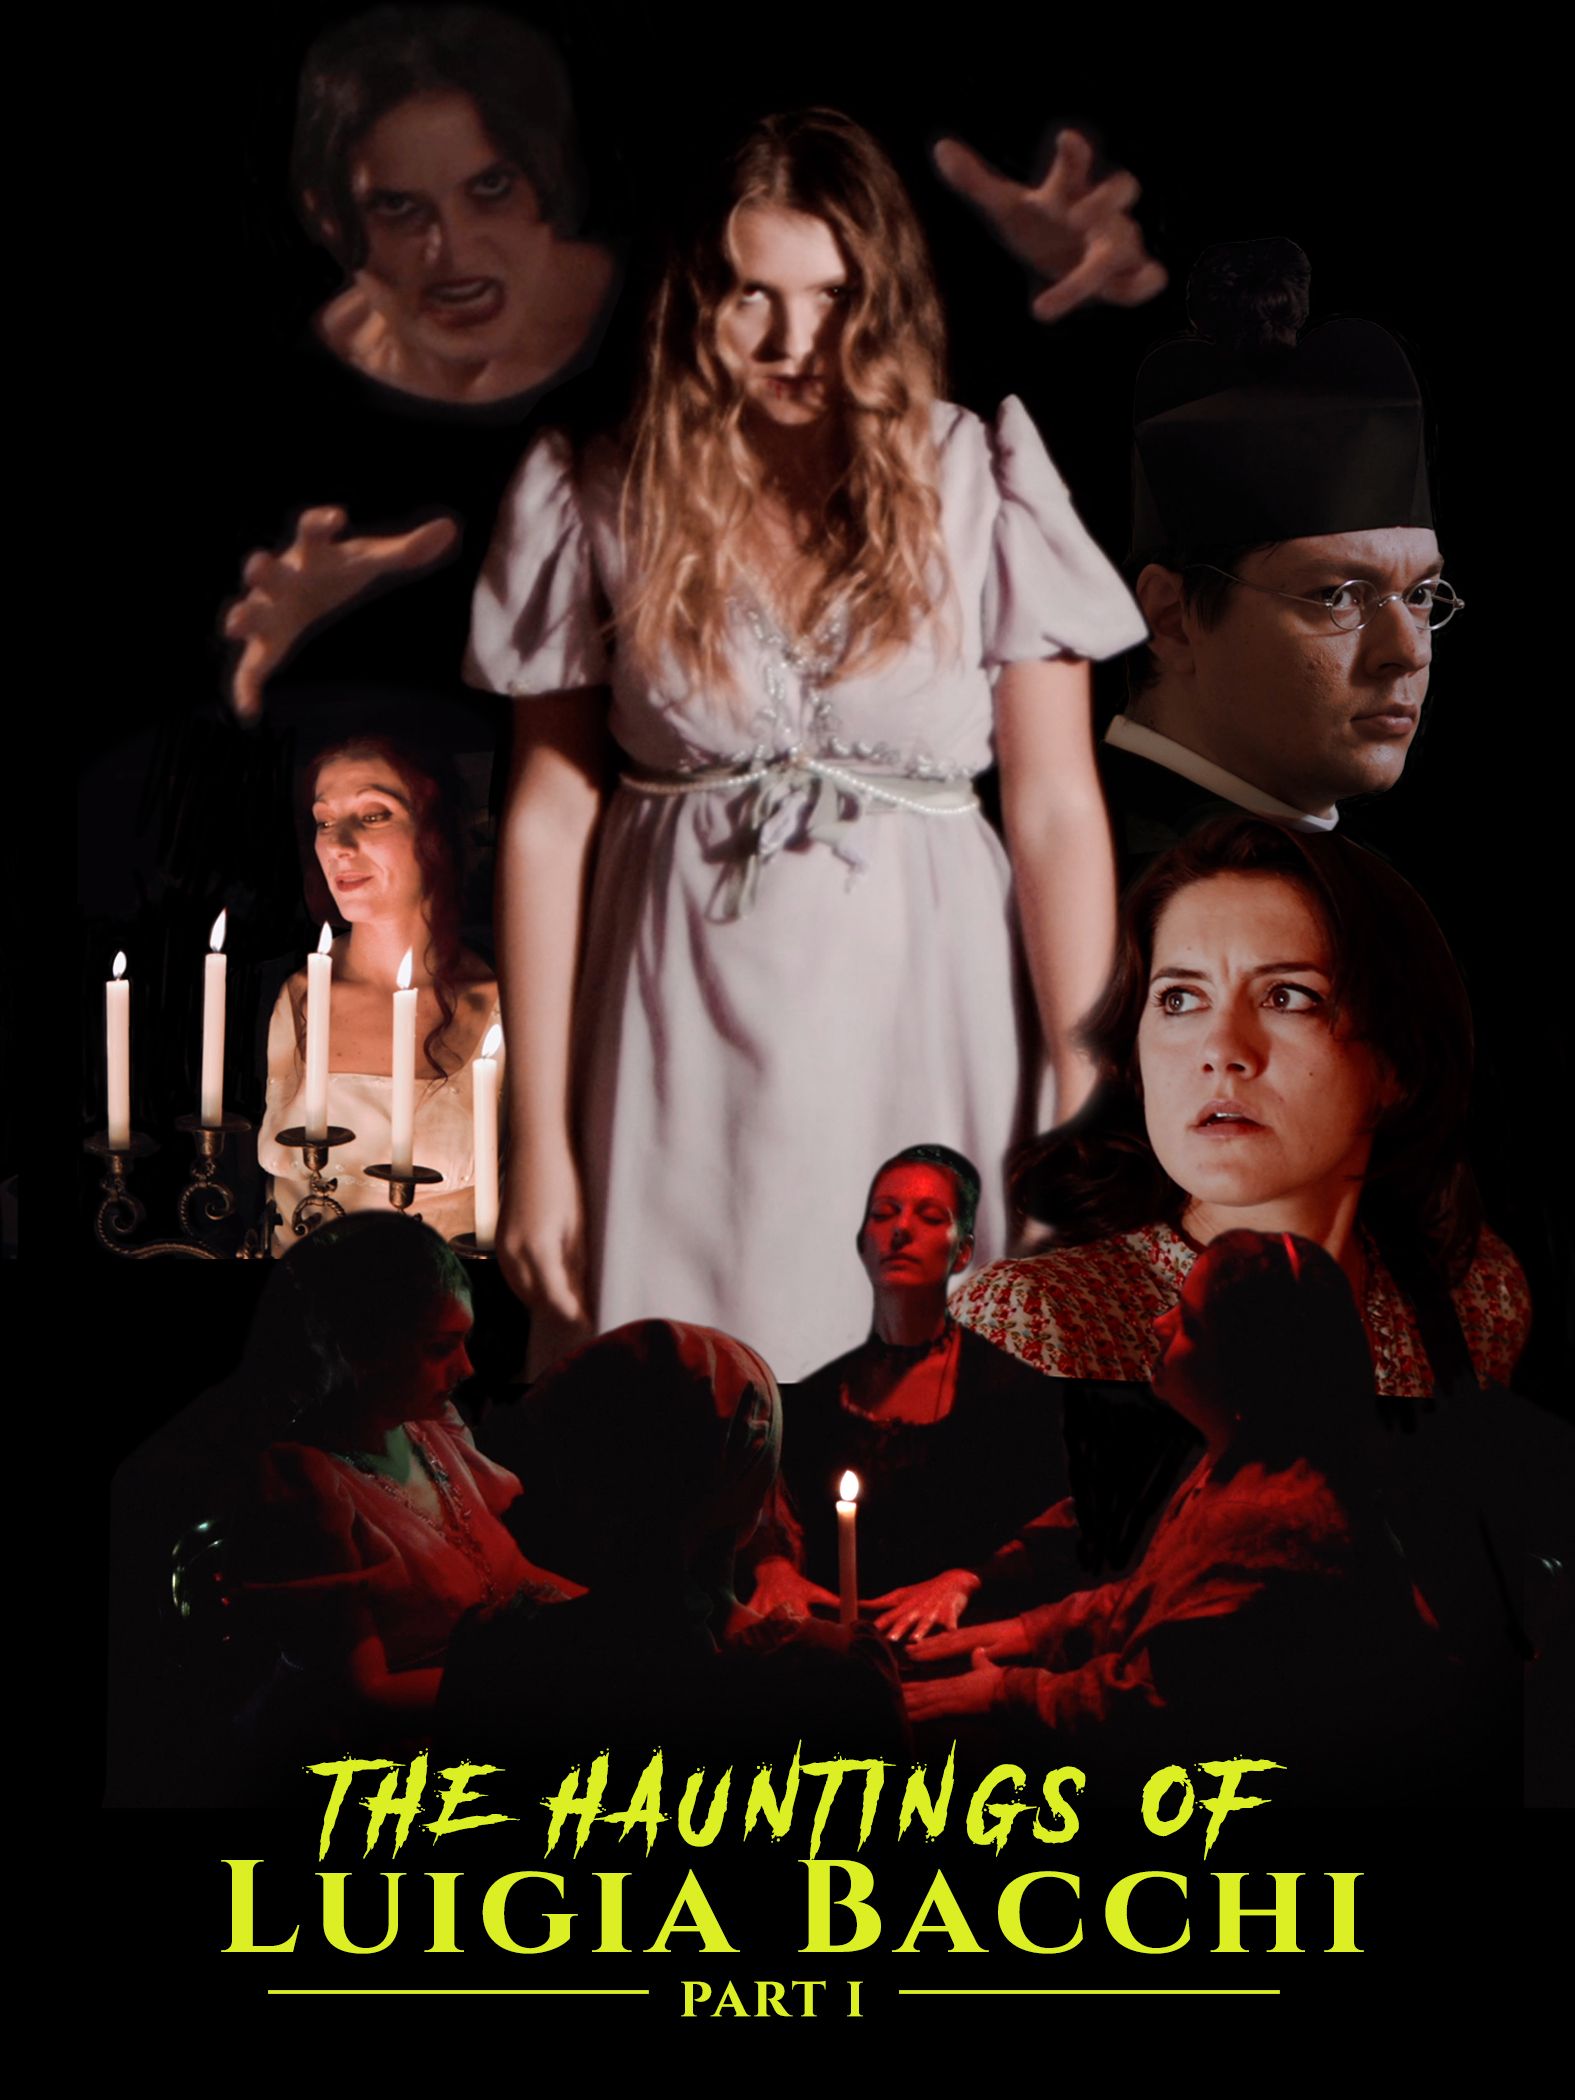 The Hauntings of Luigia Bacci: Part 1